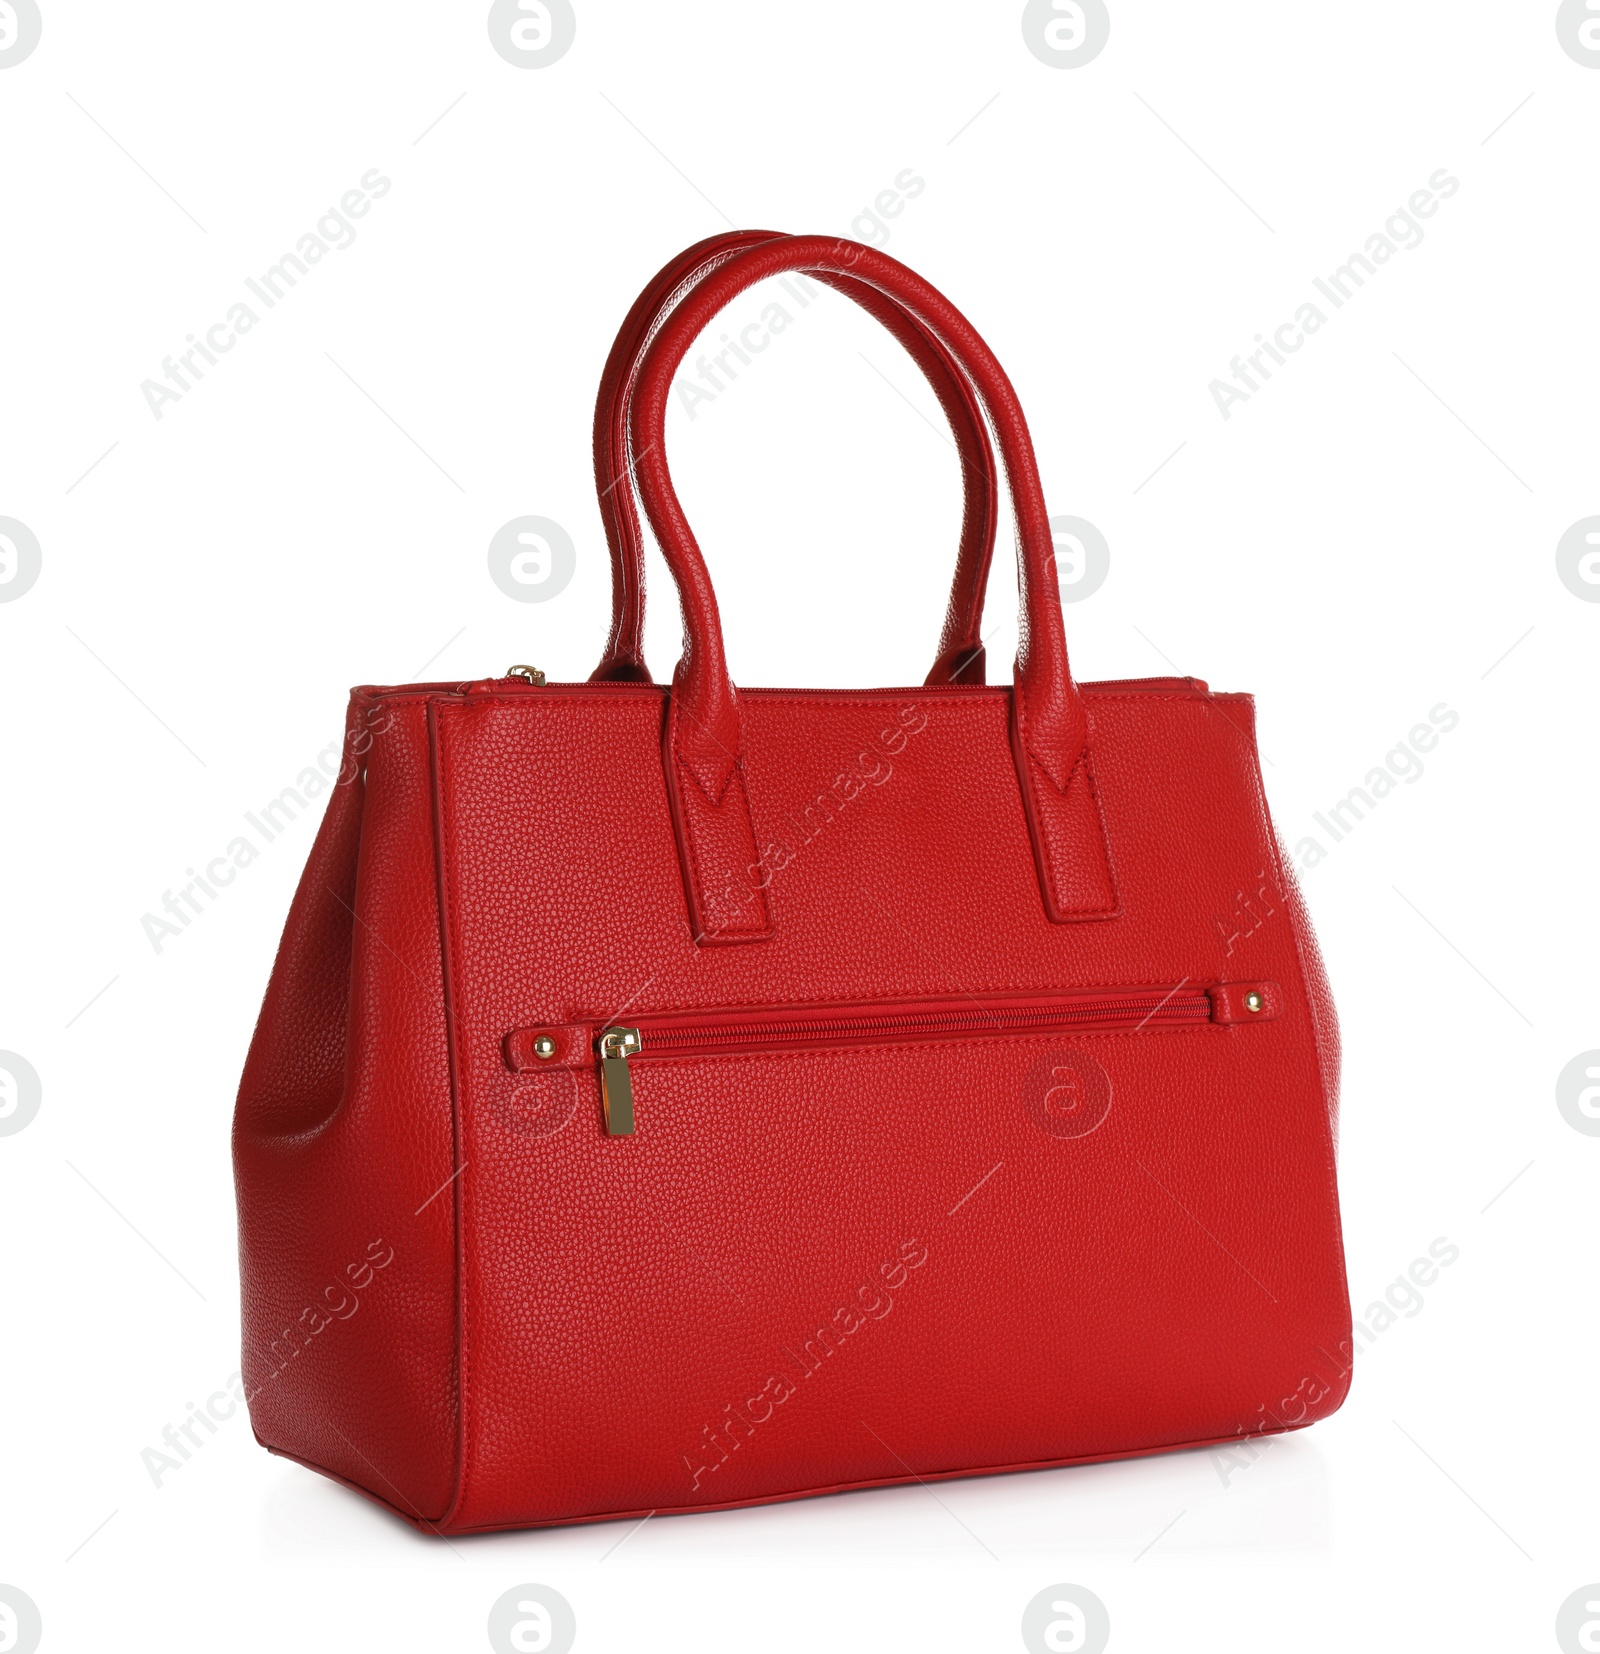 Photo of Red leather women's bag isolated on white